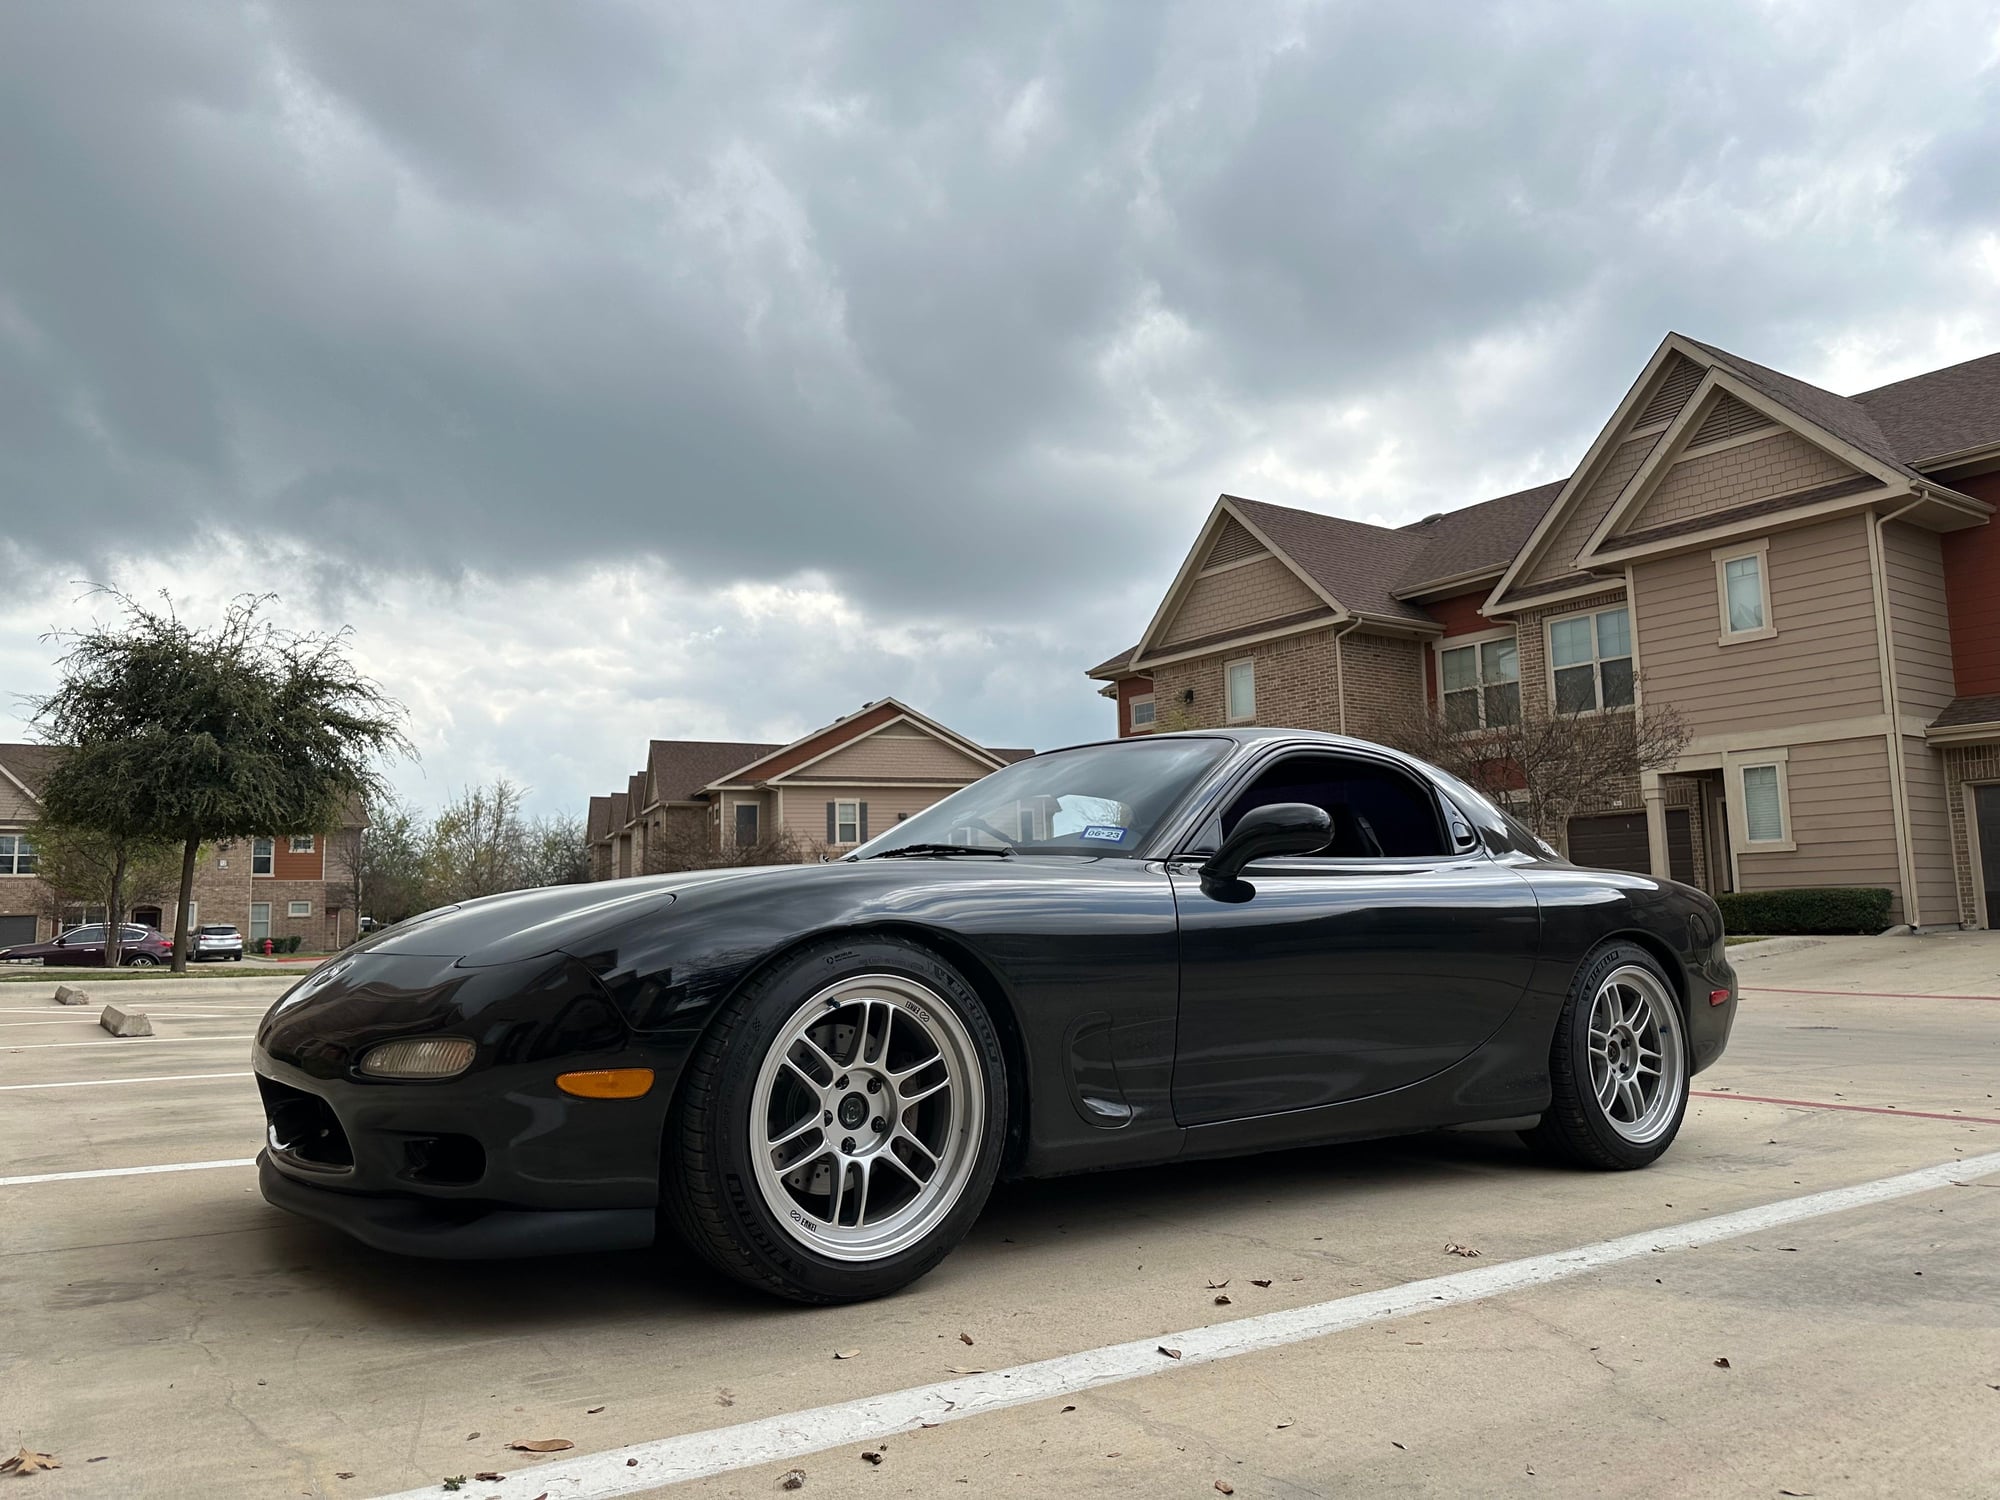 Engine - Power Adders - WTB: aftermarket SMIC - Used - 1993 to 1995 Mazda RX-7 - Austin, TX 78737, United States